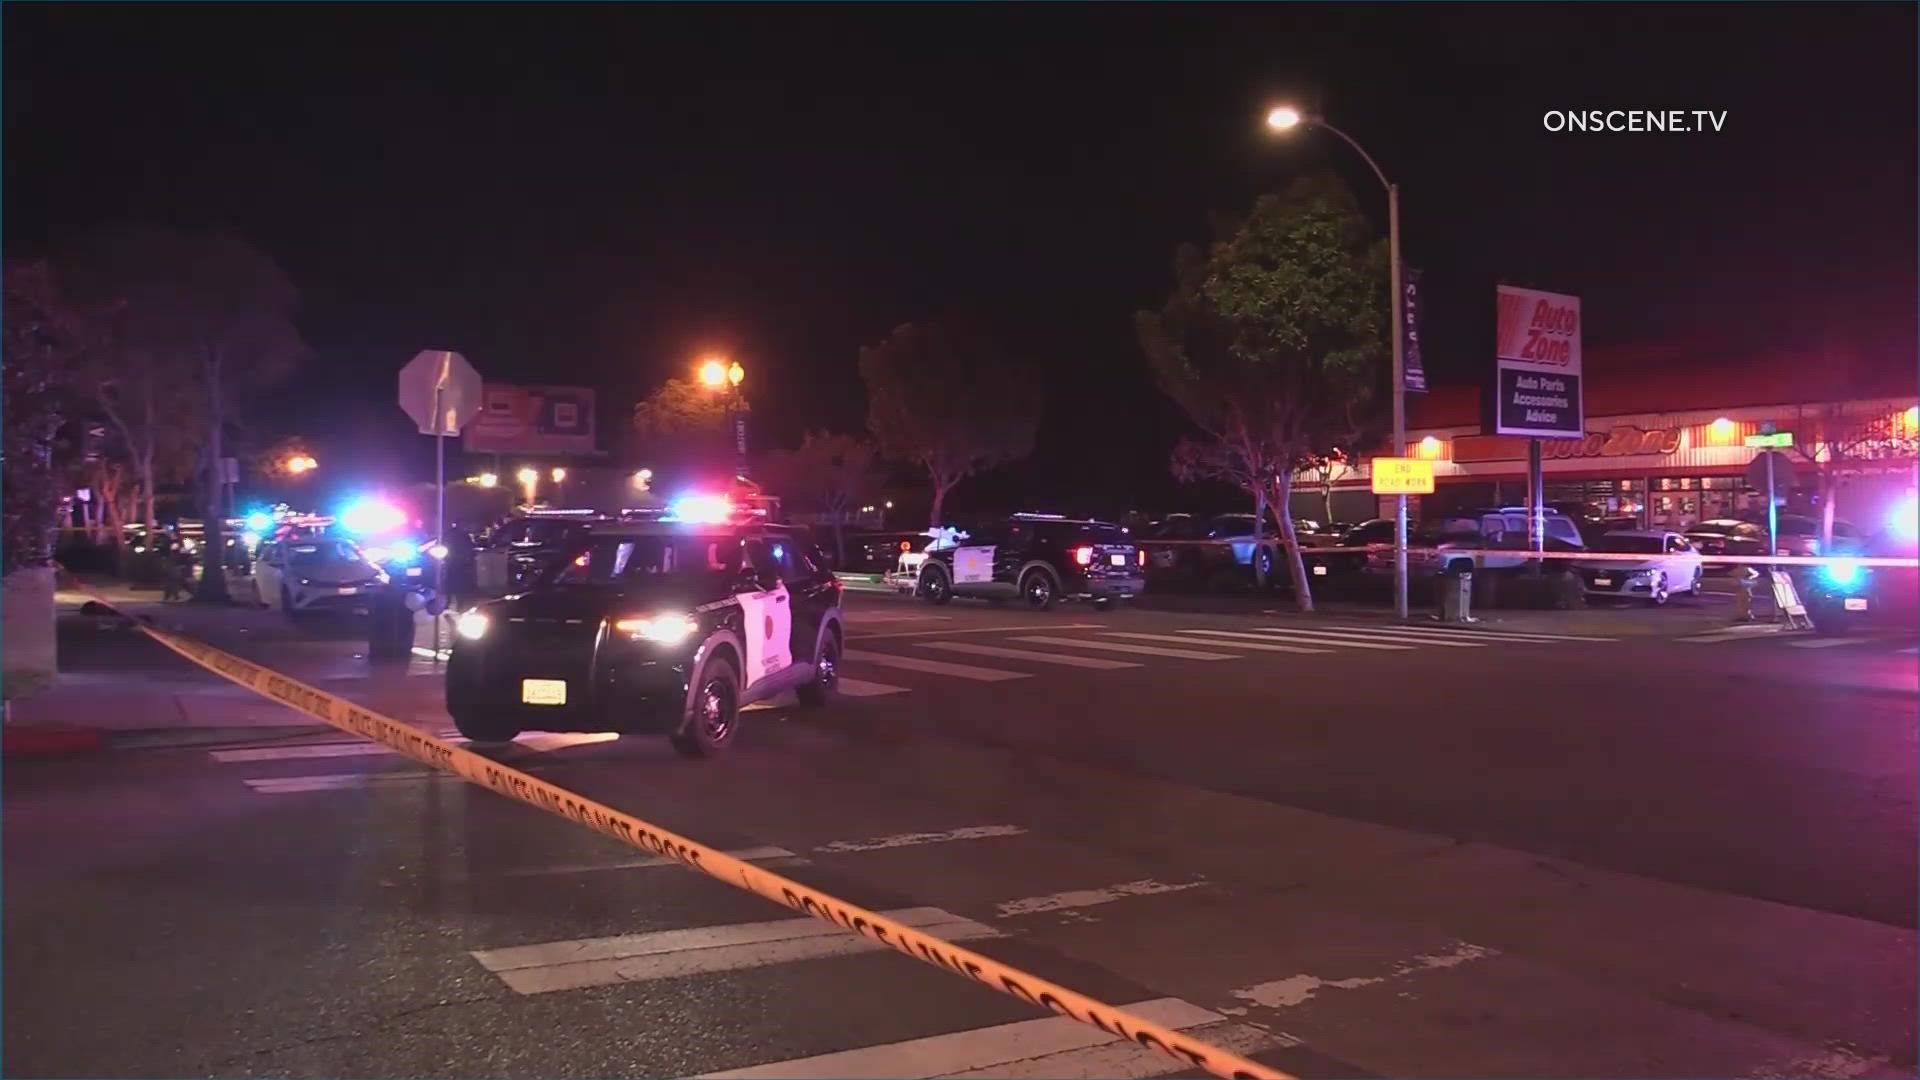 A 46-year-old man was hospitalized in critical condition after being shot multiple times during a fight with several people in Logan Heights, police said.